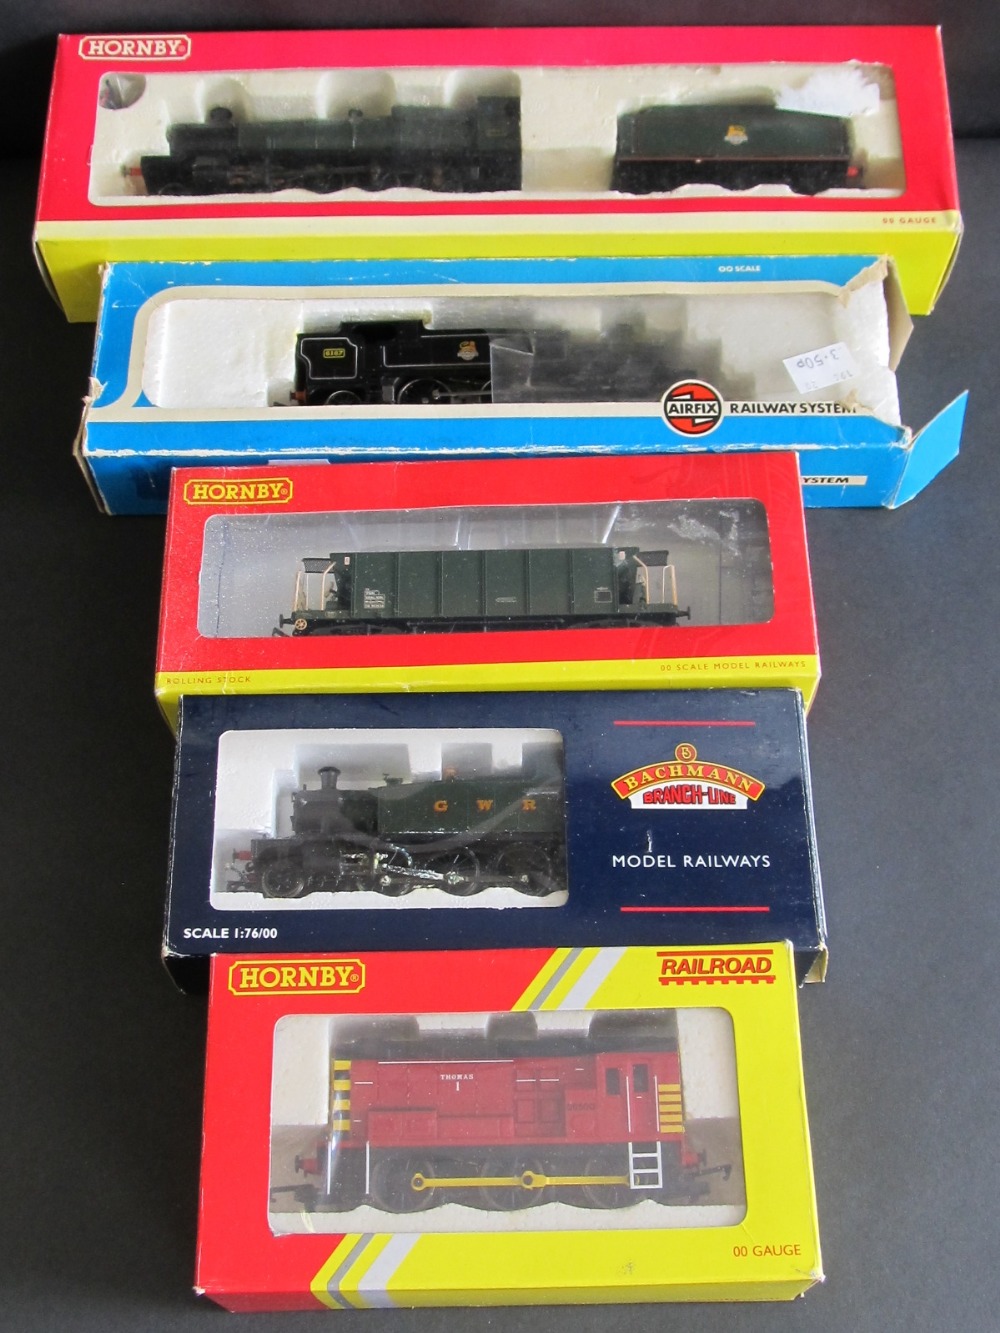 A Hornby boxed OO gauge BR livery 2-8-0 loco and tender, Bachmann boxed OO gauge GWR 2-6-0 Prairie